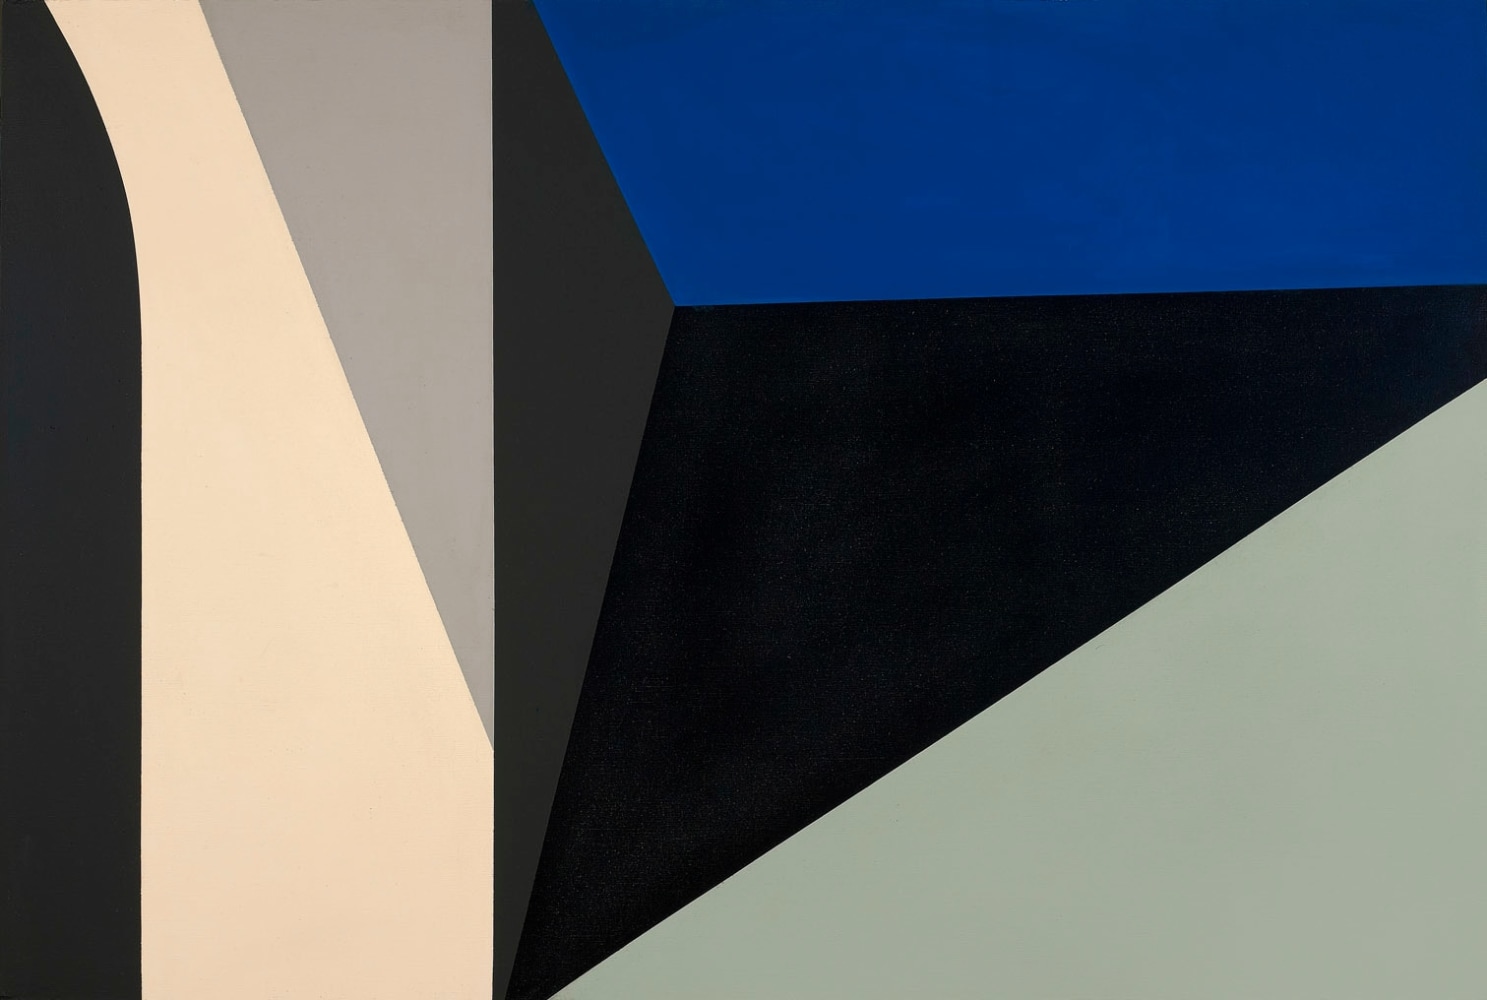 Helen Lundeberg(1908-1999) Untitled, 1963 oil on canvas 40 x 60 inches; 101.6 x 152.4 centimeters ​LSFA# 10484